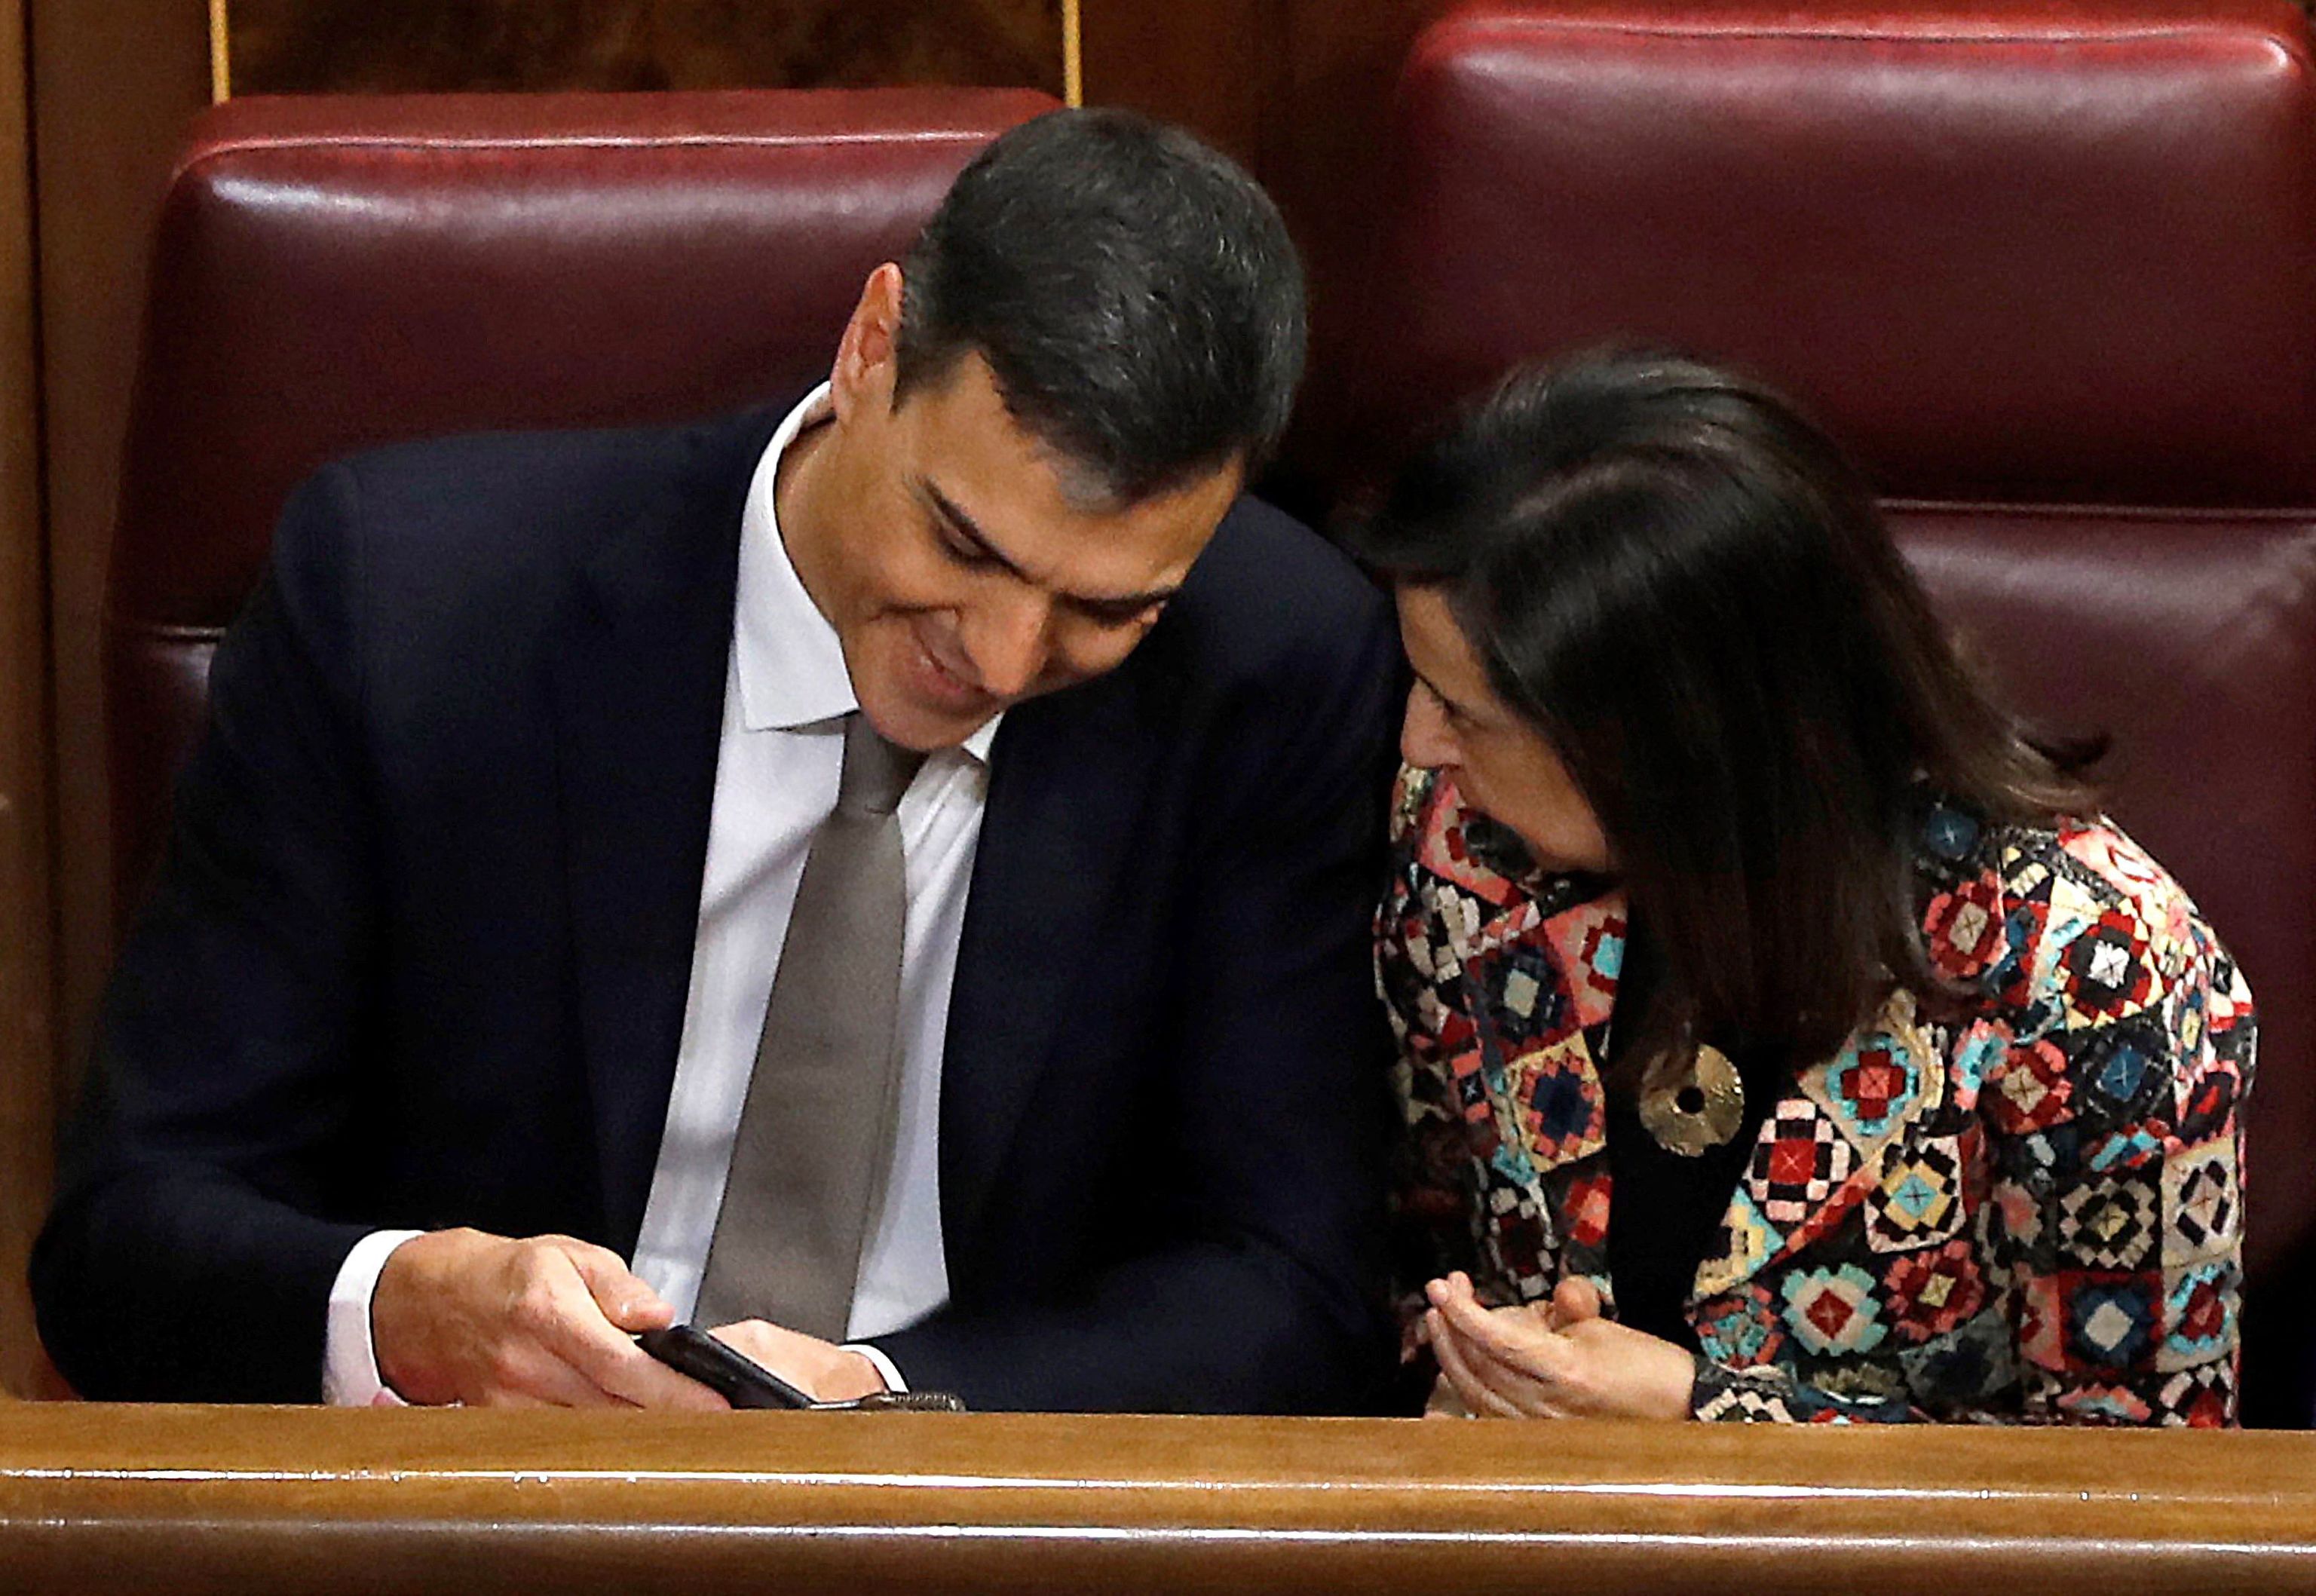 (FILES) In this file photo taken on May 31, 2018 then leader of the Spanish Socialist Party PSOE, Pedro  lt;HIT gt;Sanchez lt;/HIT gt; (L) shows his mobile to socialist MP Margarita Robles during a debate on a no-confidence motion at the Lower House of the Spanish Parliament in Madrid. - Spain said on May 2, 2022 that the mobile phones of Prime Minister Pedro  lt;HIT gt;Sanchez lt;/HIT gt; and Defence Minister Margarita Robles were tapped using Pegasus spyware in an "illicit and external" intervention. (Photo by Juan Carlos Hidalgo / POOL / AFP)